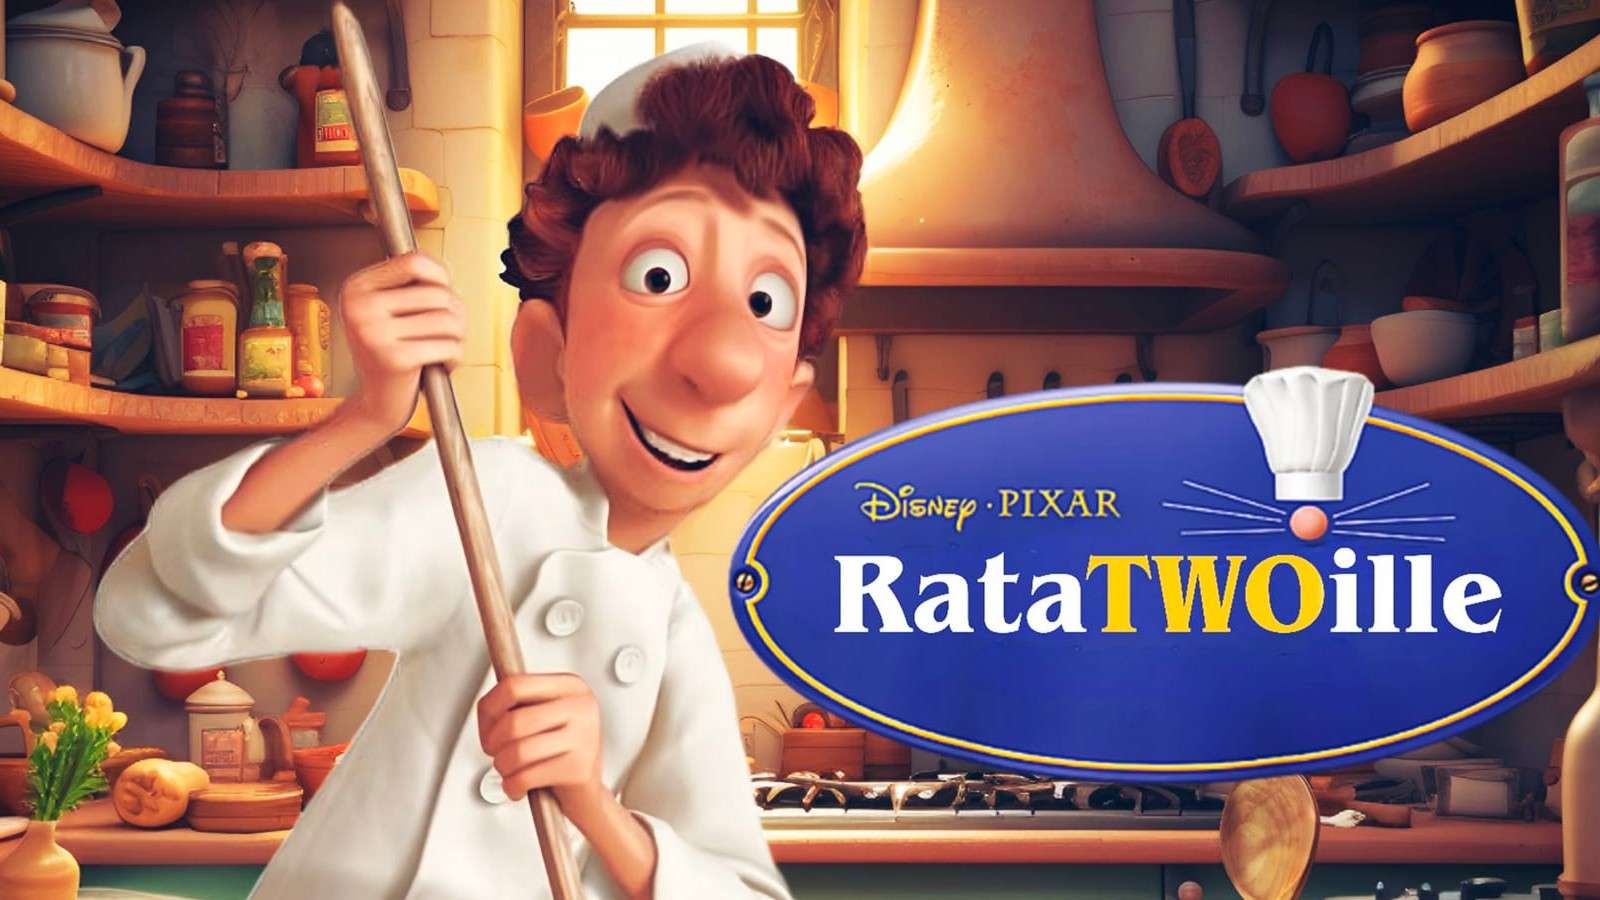 The fake poster for Ratatouille 2